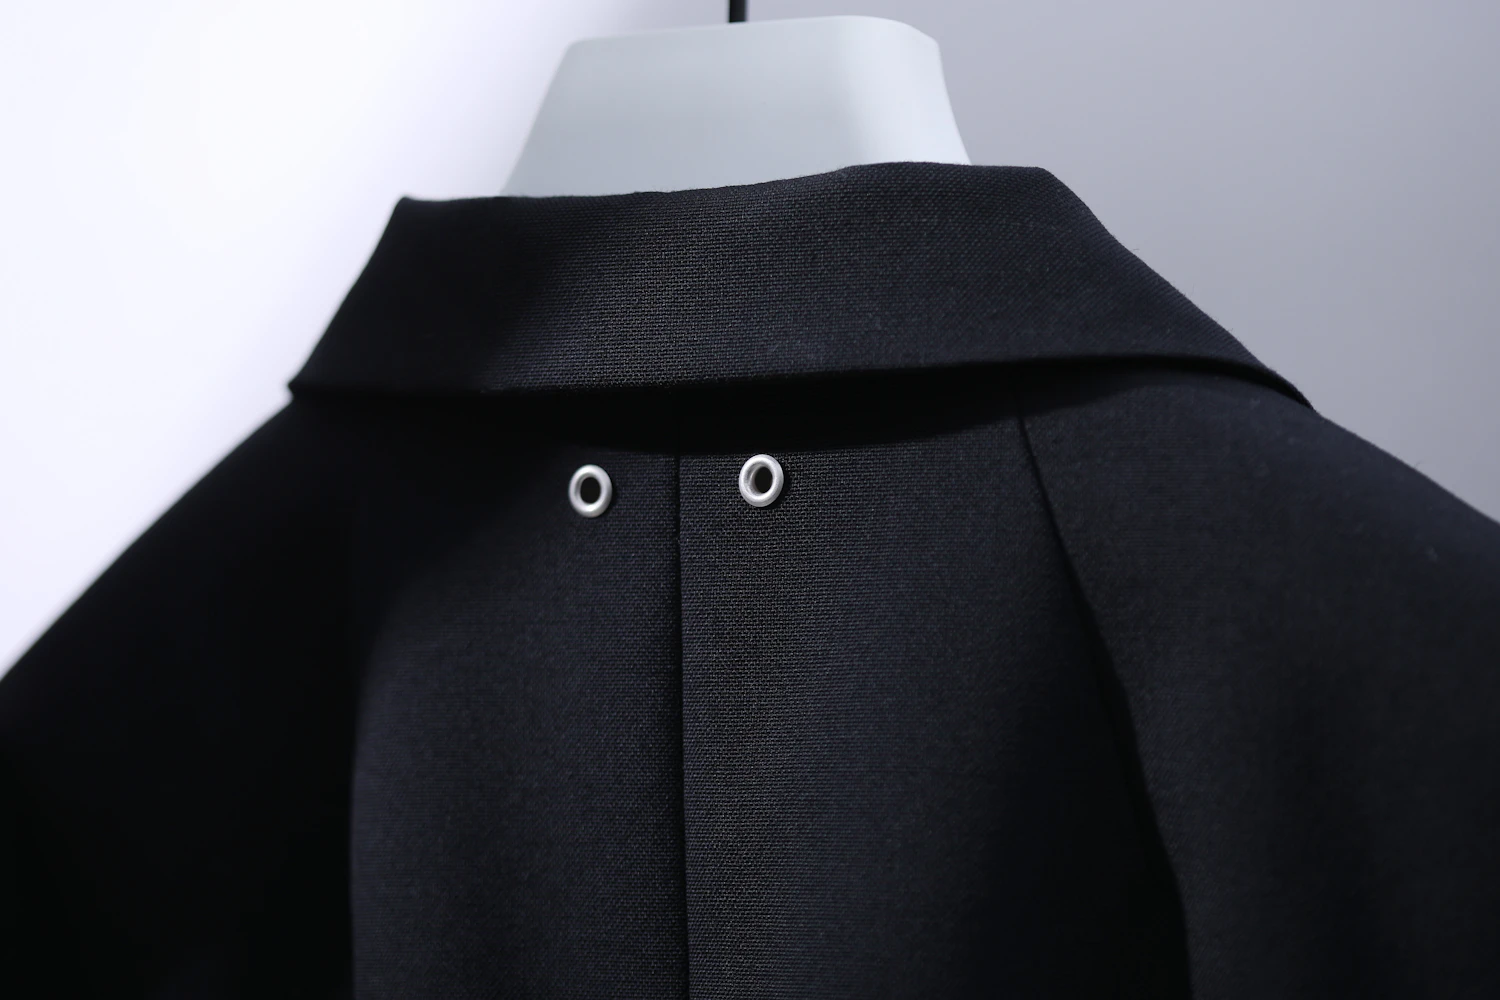 Eyelet embellishments are placed on the back collar of the jacket